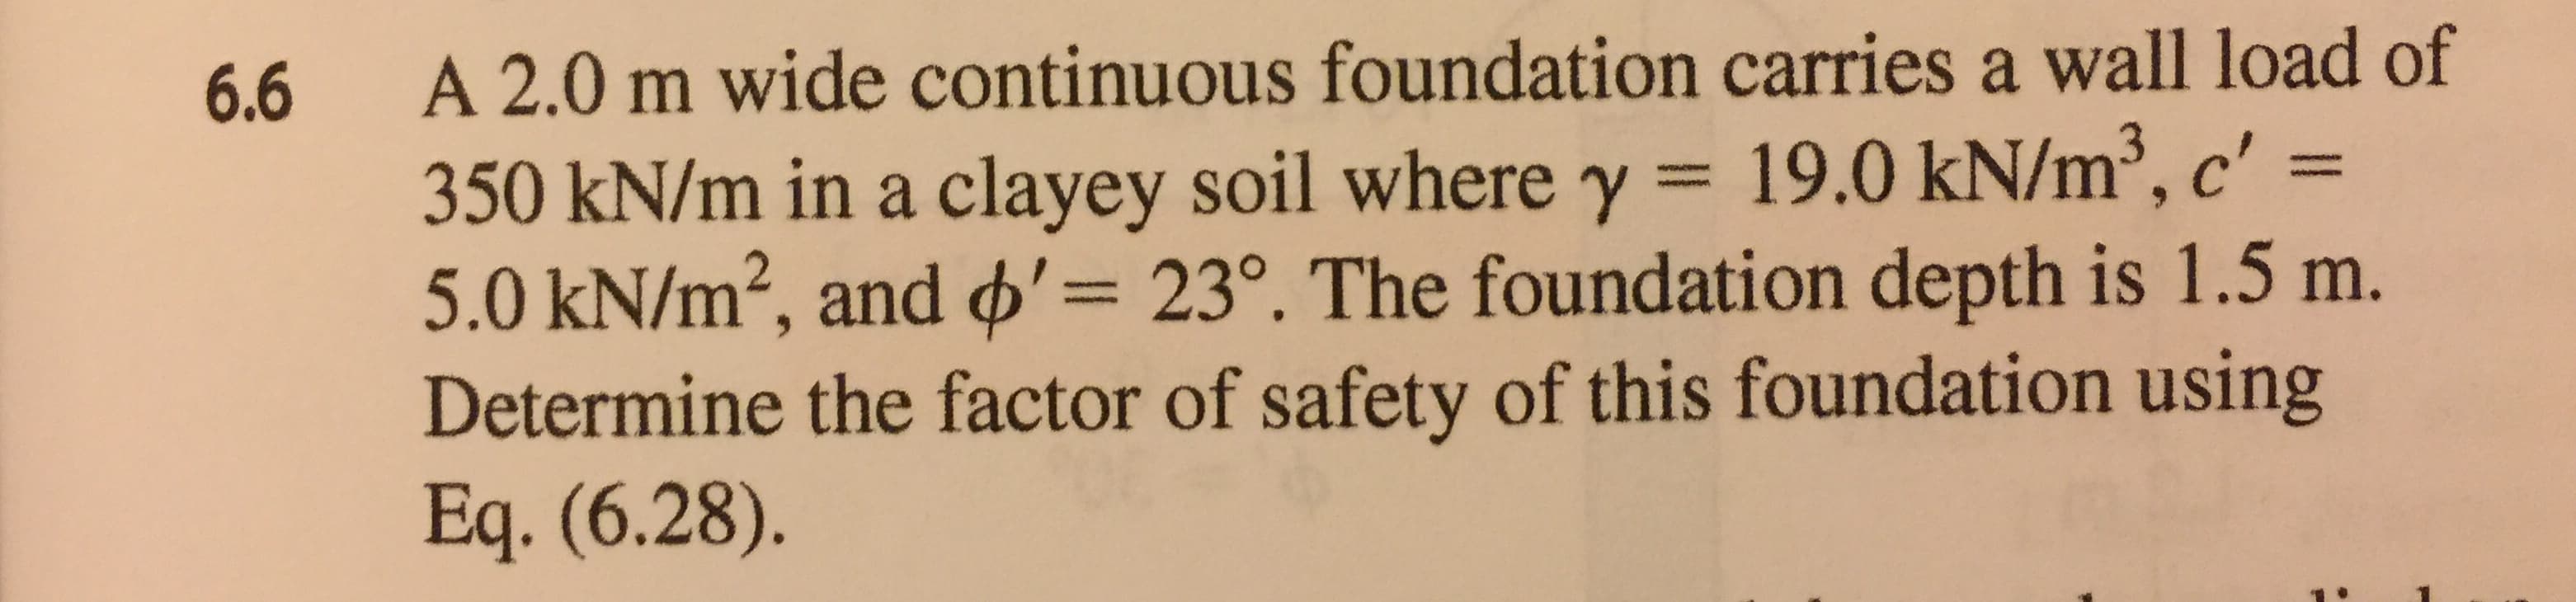 A 2.0 m wide continuous foundation carries a wall load of
350 kN/m in a clayey soil where y 19.0 kN/m3, c"
5.0 kN/m2, and φ'= 23°. The foundation depth is 1.5 m.
Determine the factor of safety of this foundation using
Eq. (6.28).
6.6
